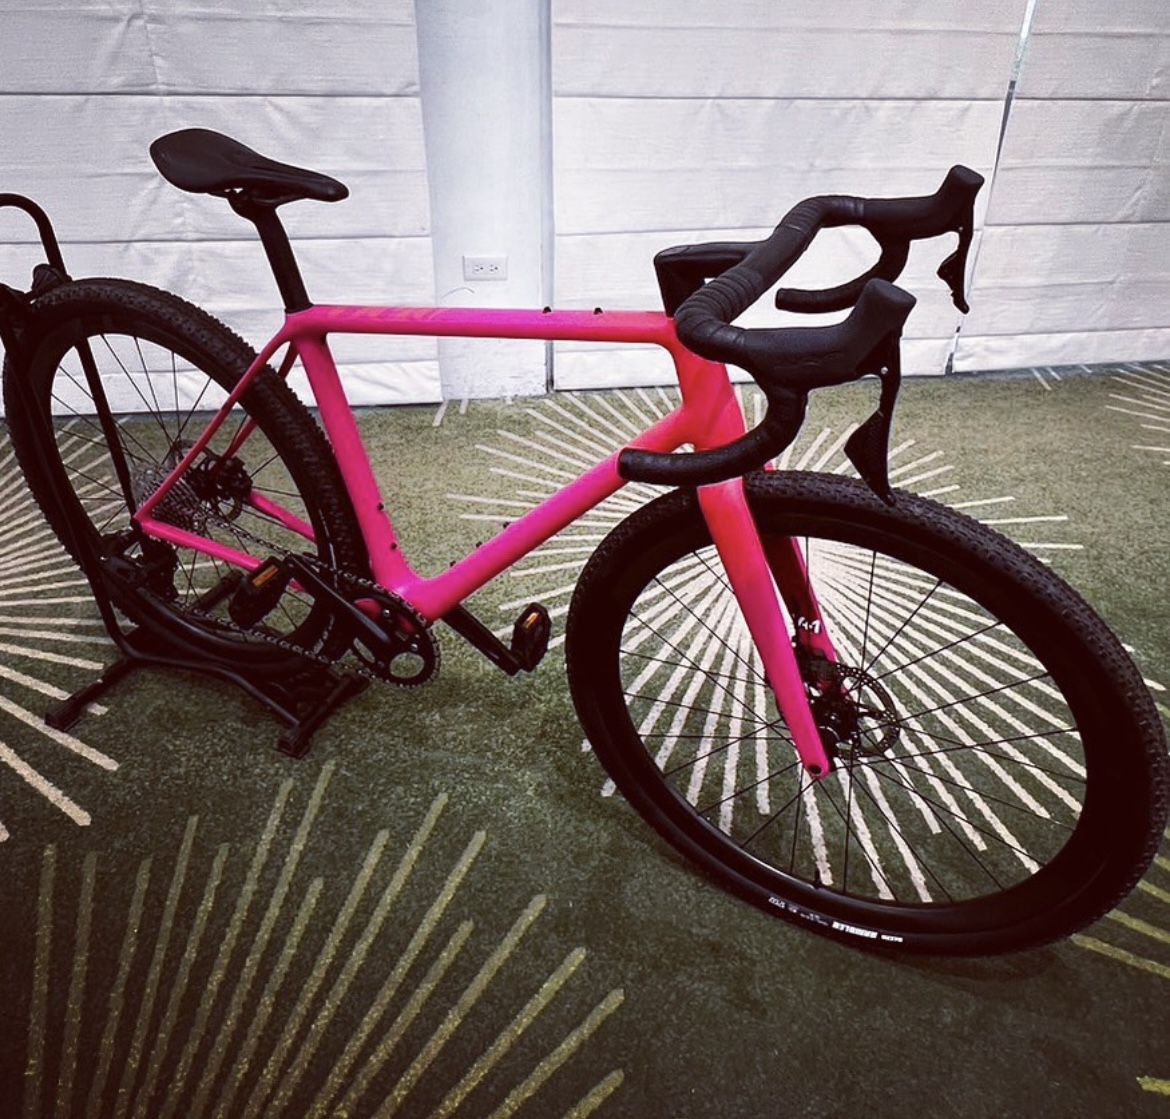 The photo shows a view of the new Classified and TRP-developed electronic groupset on a pink gravel bike.